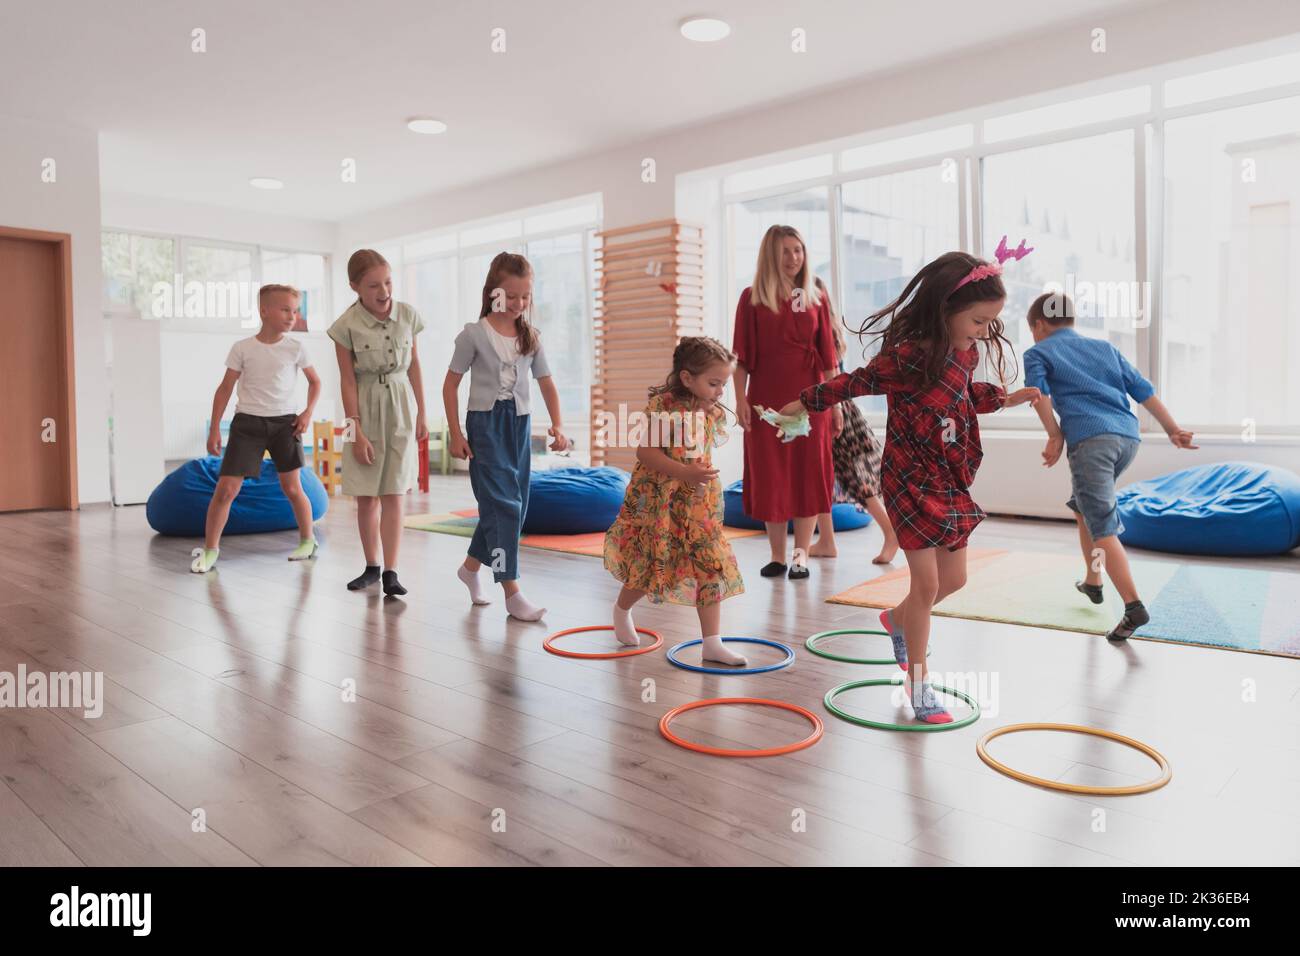 Small nursery school children with female teacher on floor indoors in classroom, doing exercise. Jumping over hula hoop circles track on the floor. Stock Photo